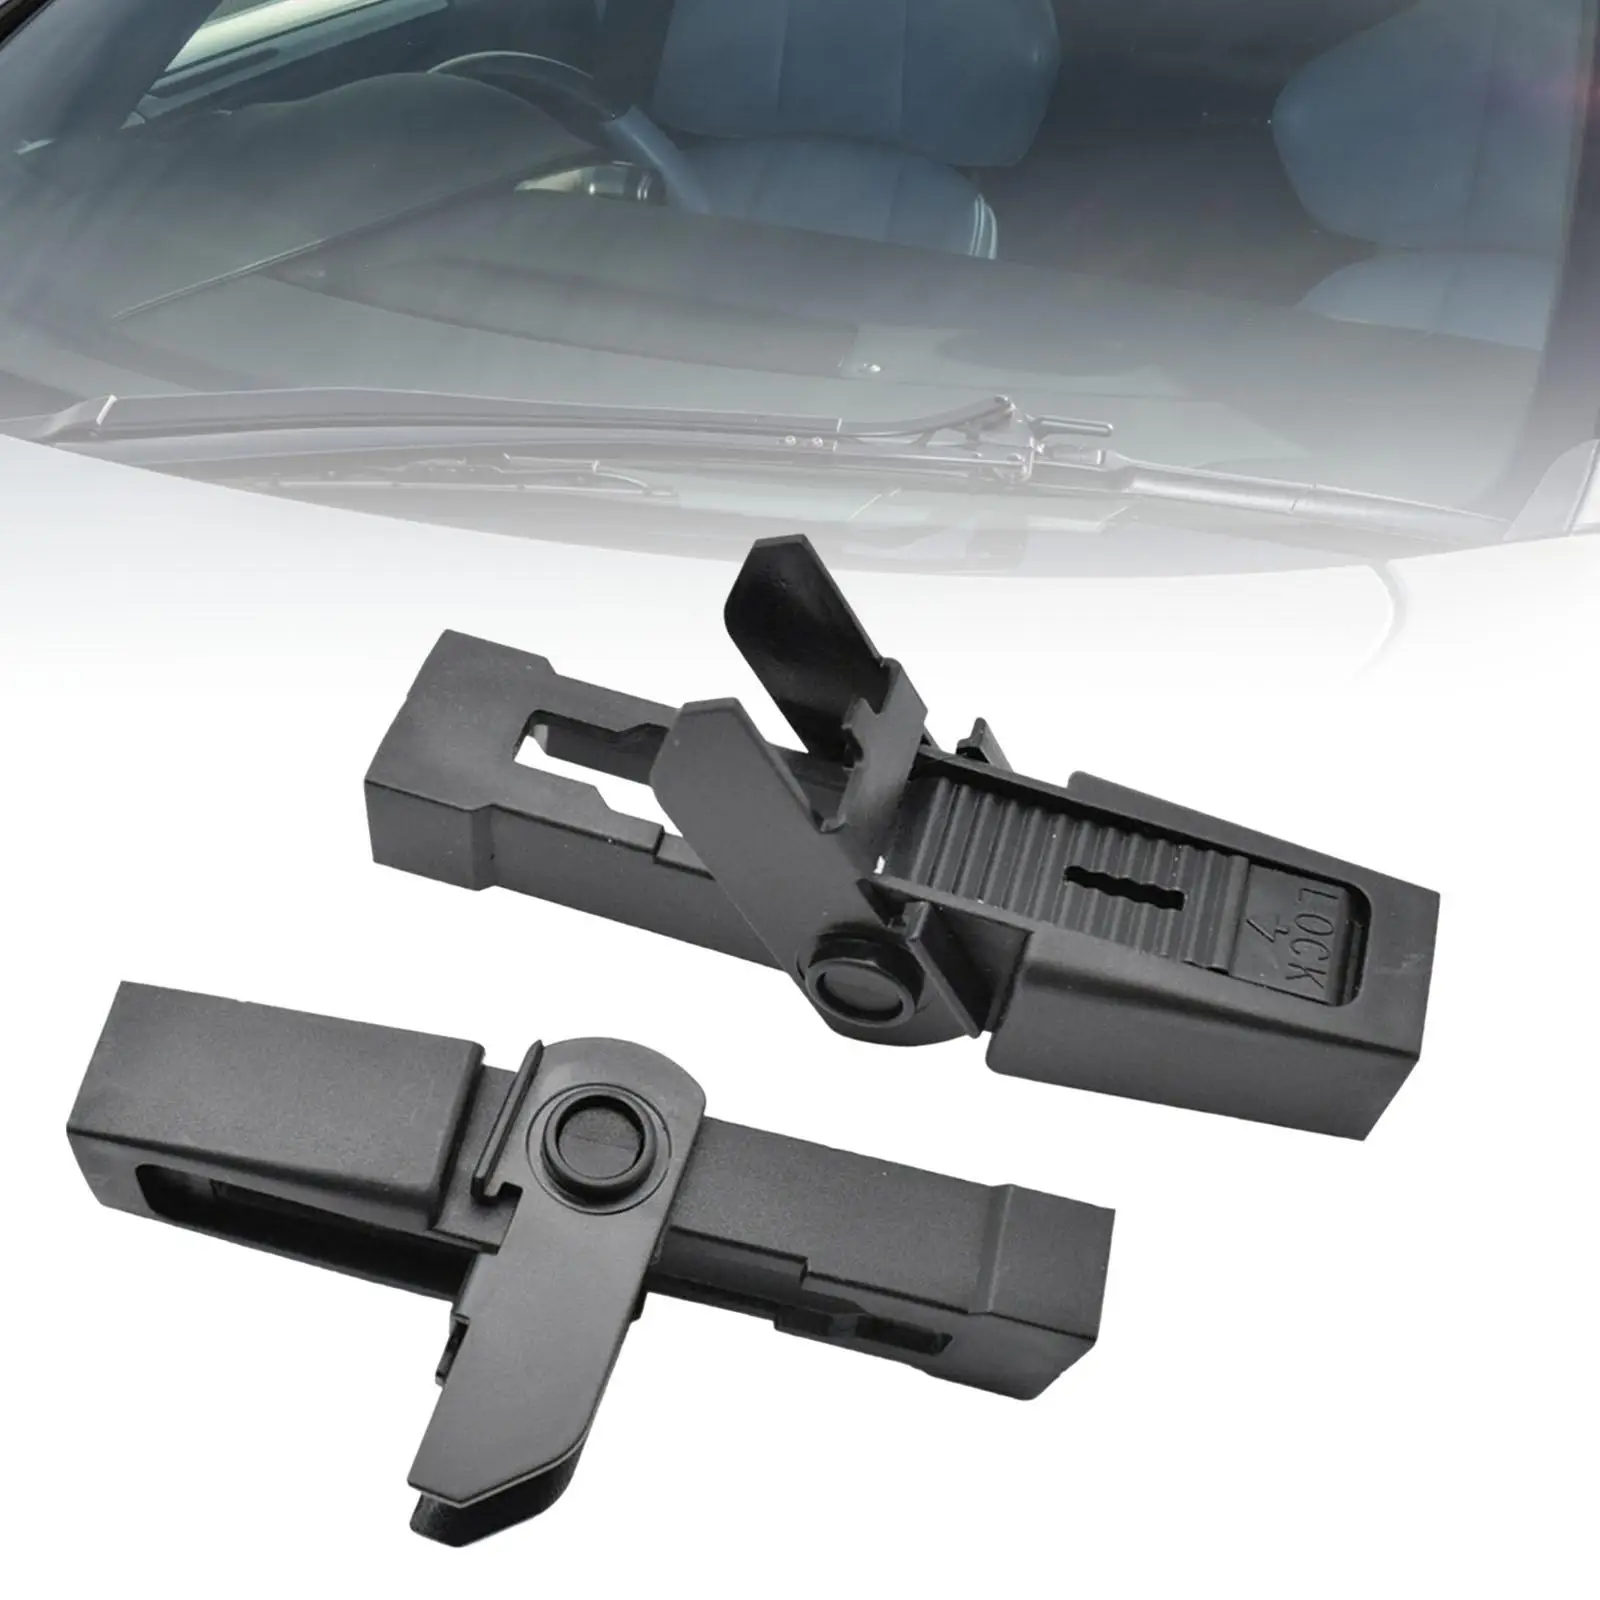 2Pcs Car Front Windshield Wiper Arm Retaining Clip Black for Discovery 2 L322 High Quality Accessory